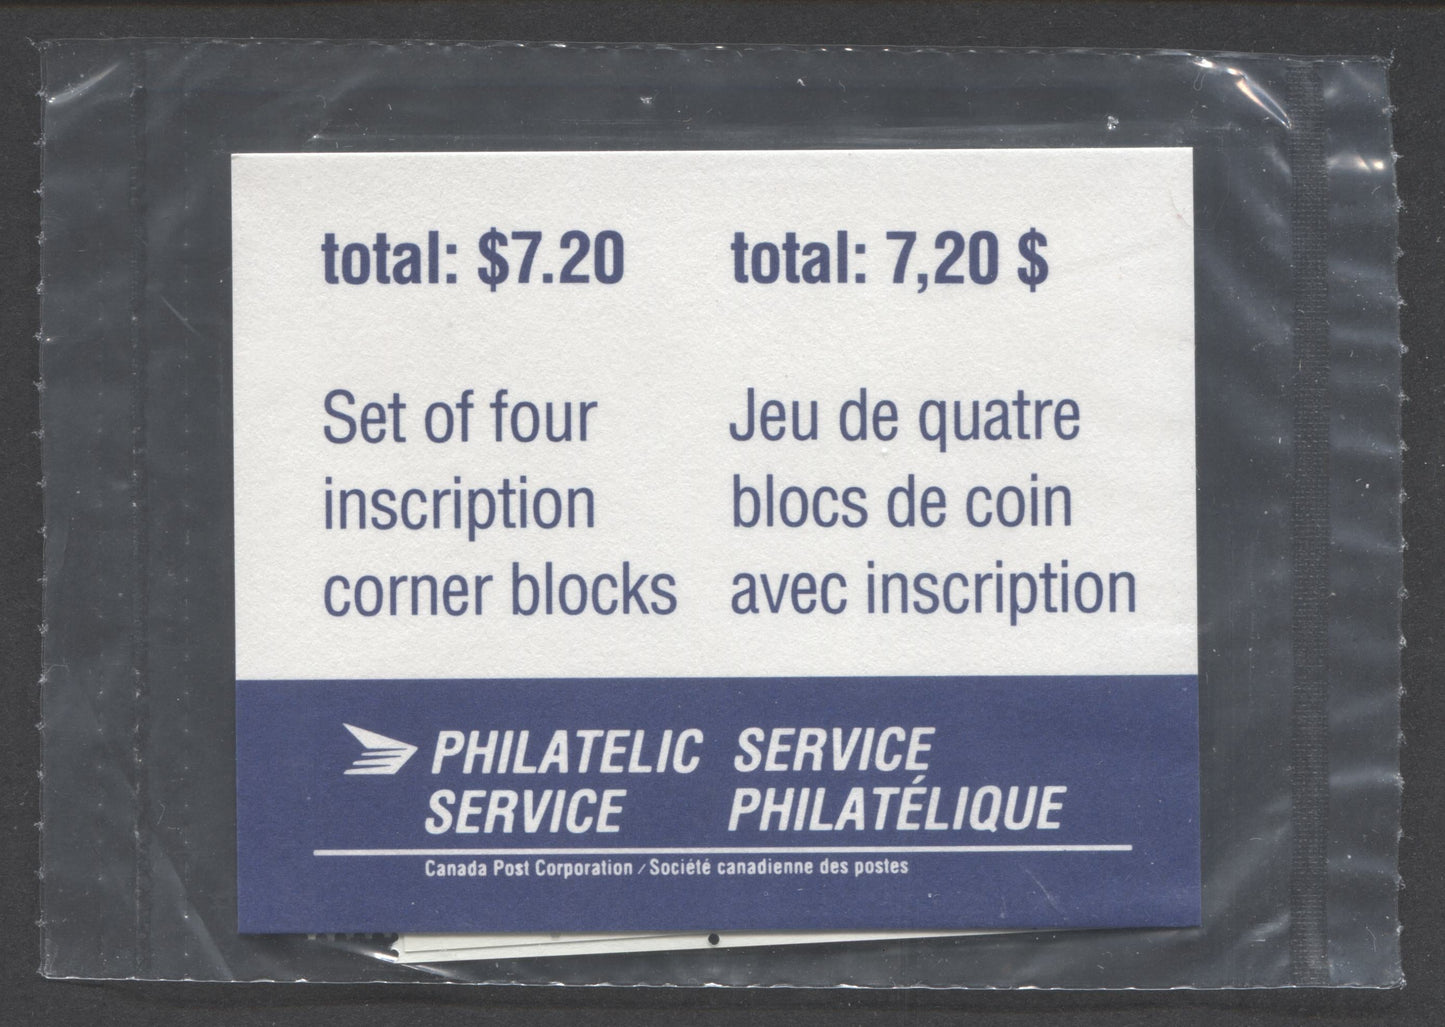 Lot 41 Canada #1360 45c Multicoloured 1995 Domestic First-Class Rate Issue, Canada Post Sealed Pack of Inscription Blocks, CBN Printing On DF CPP Paper, With HB Type 6C Insert Card, VFNH, Unitrade Cat. $20